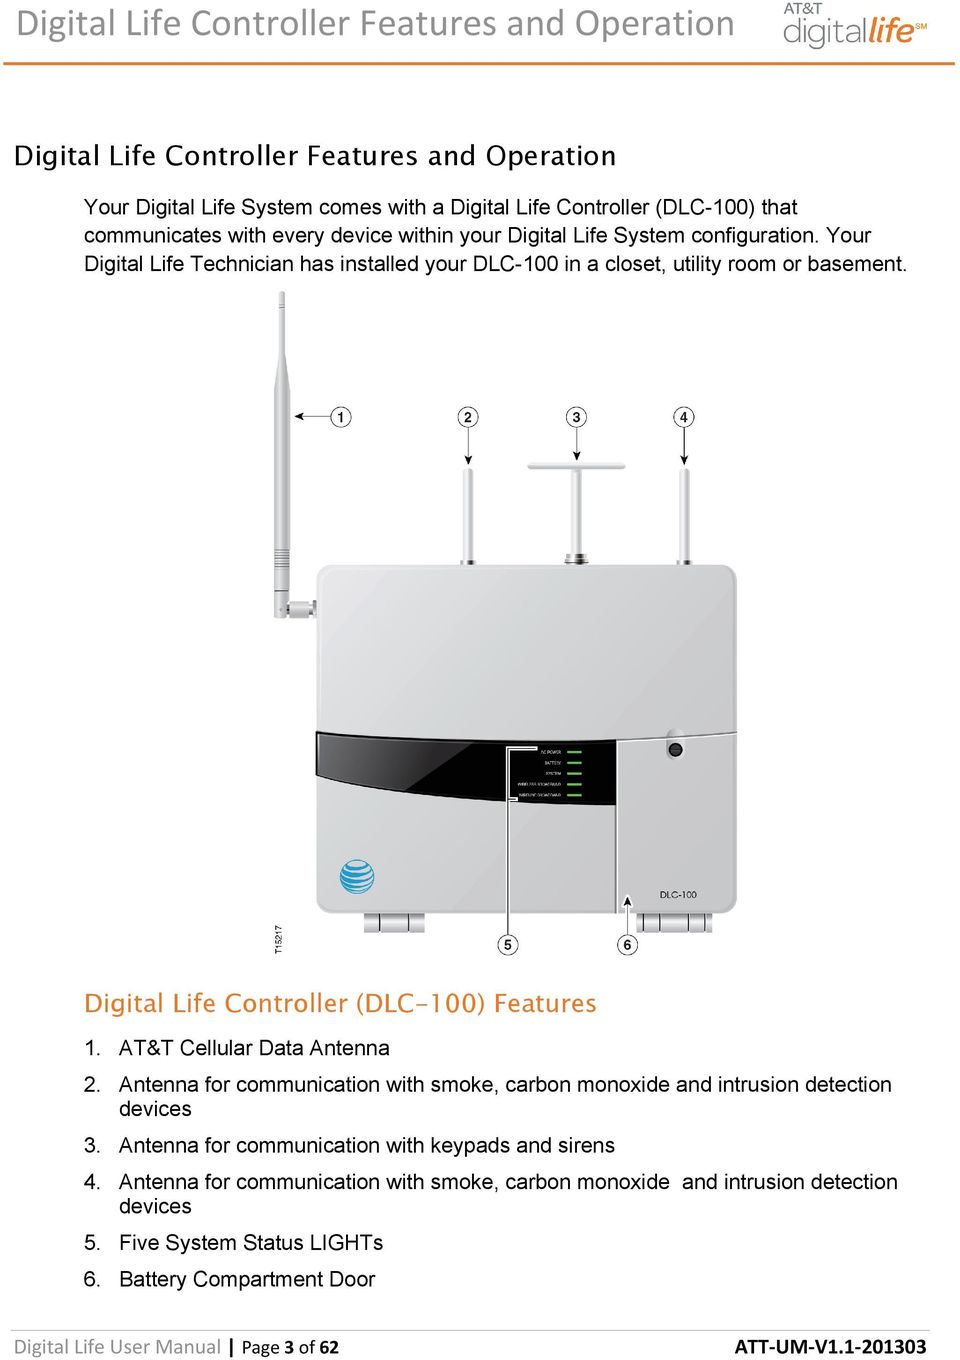 Digital Life Controller (DLC-100) Features 1. AT&T Cellular Data Antenna 2. Antenna for communication with smoke, carbon monoxide and intrusion detection devices 3.